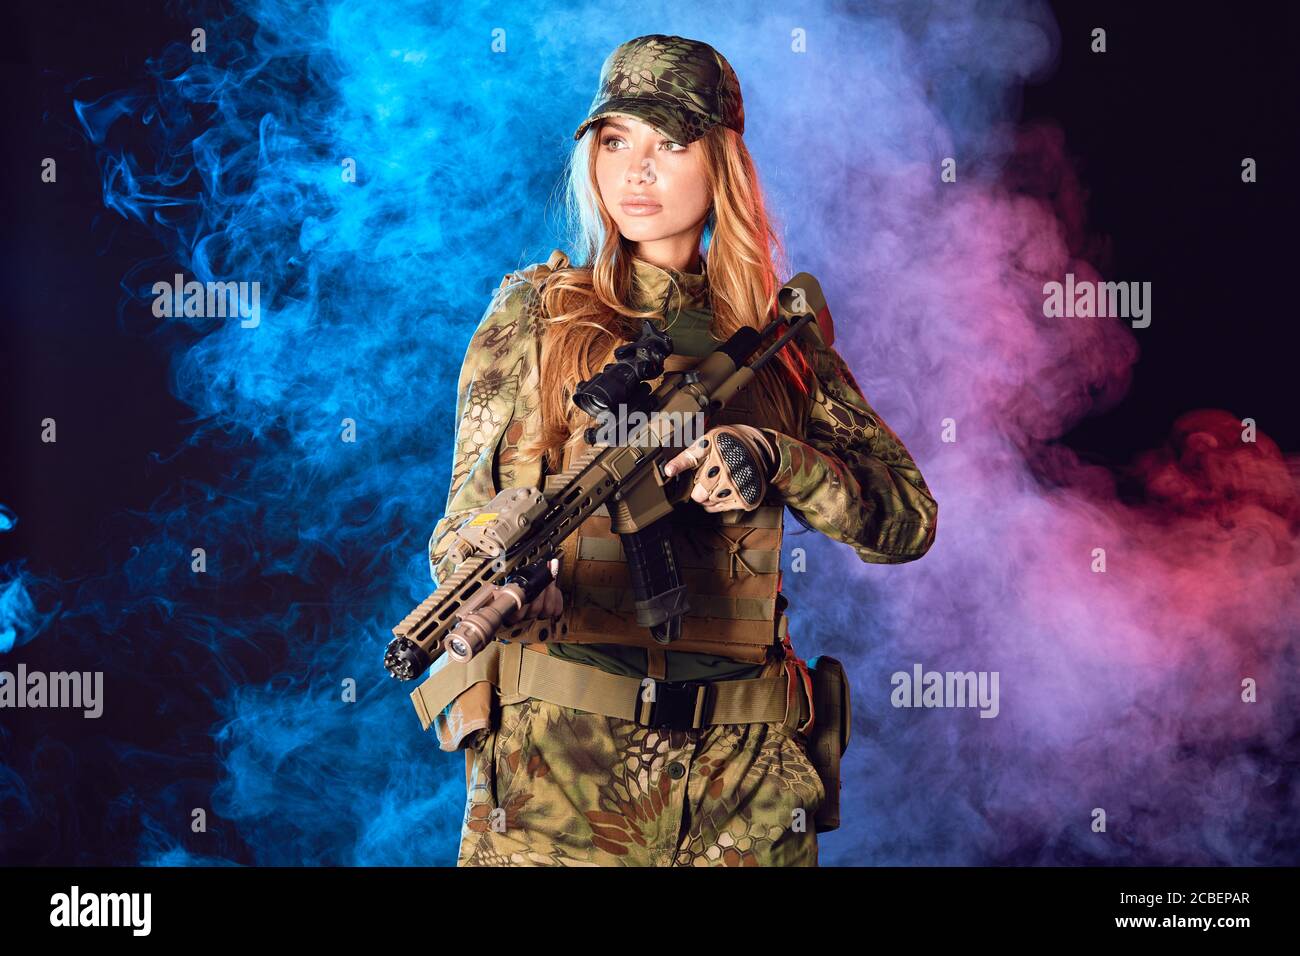 Female soldier in military camouflage uniform and cap holding sniper rifle over black background with smoky clouds Stock Photo